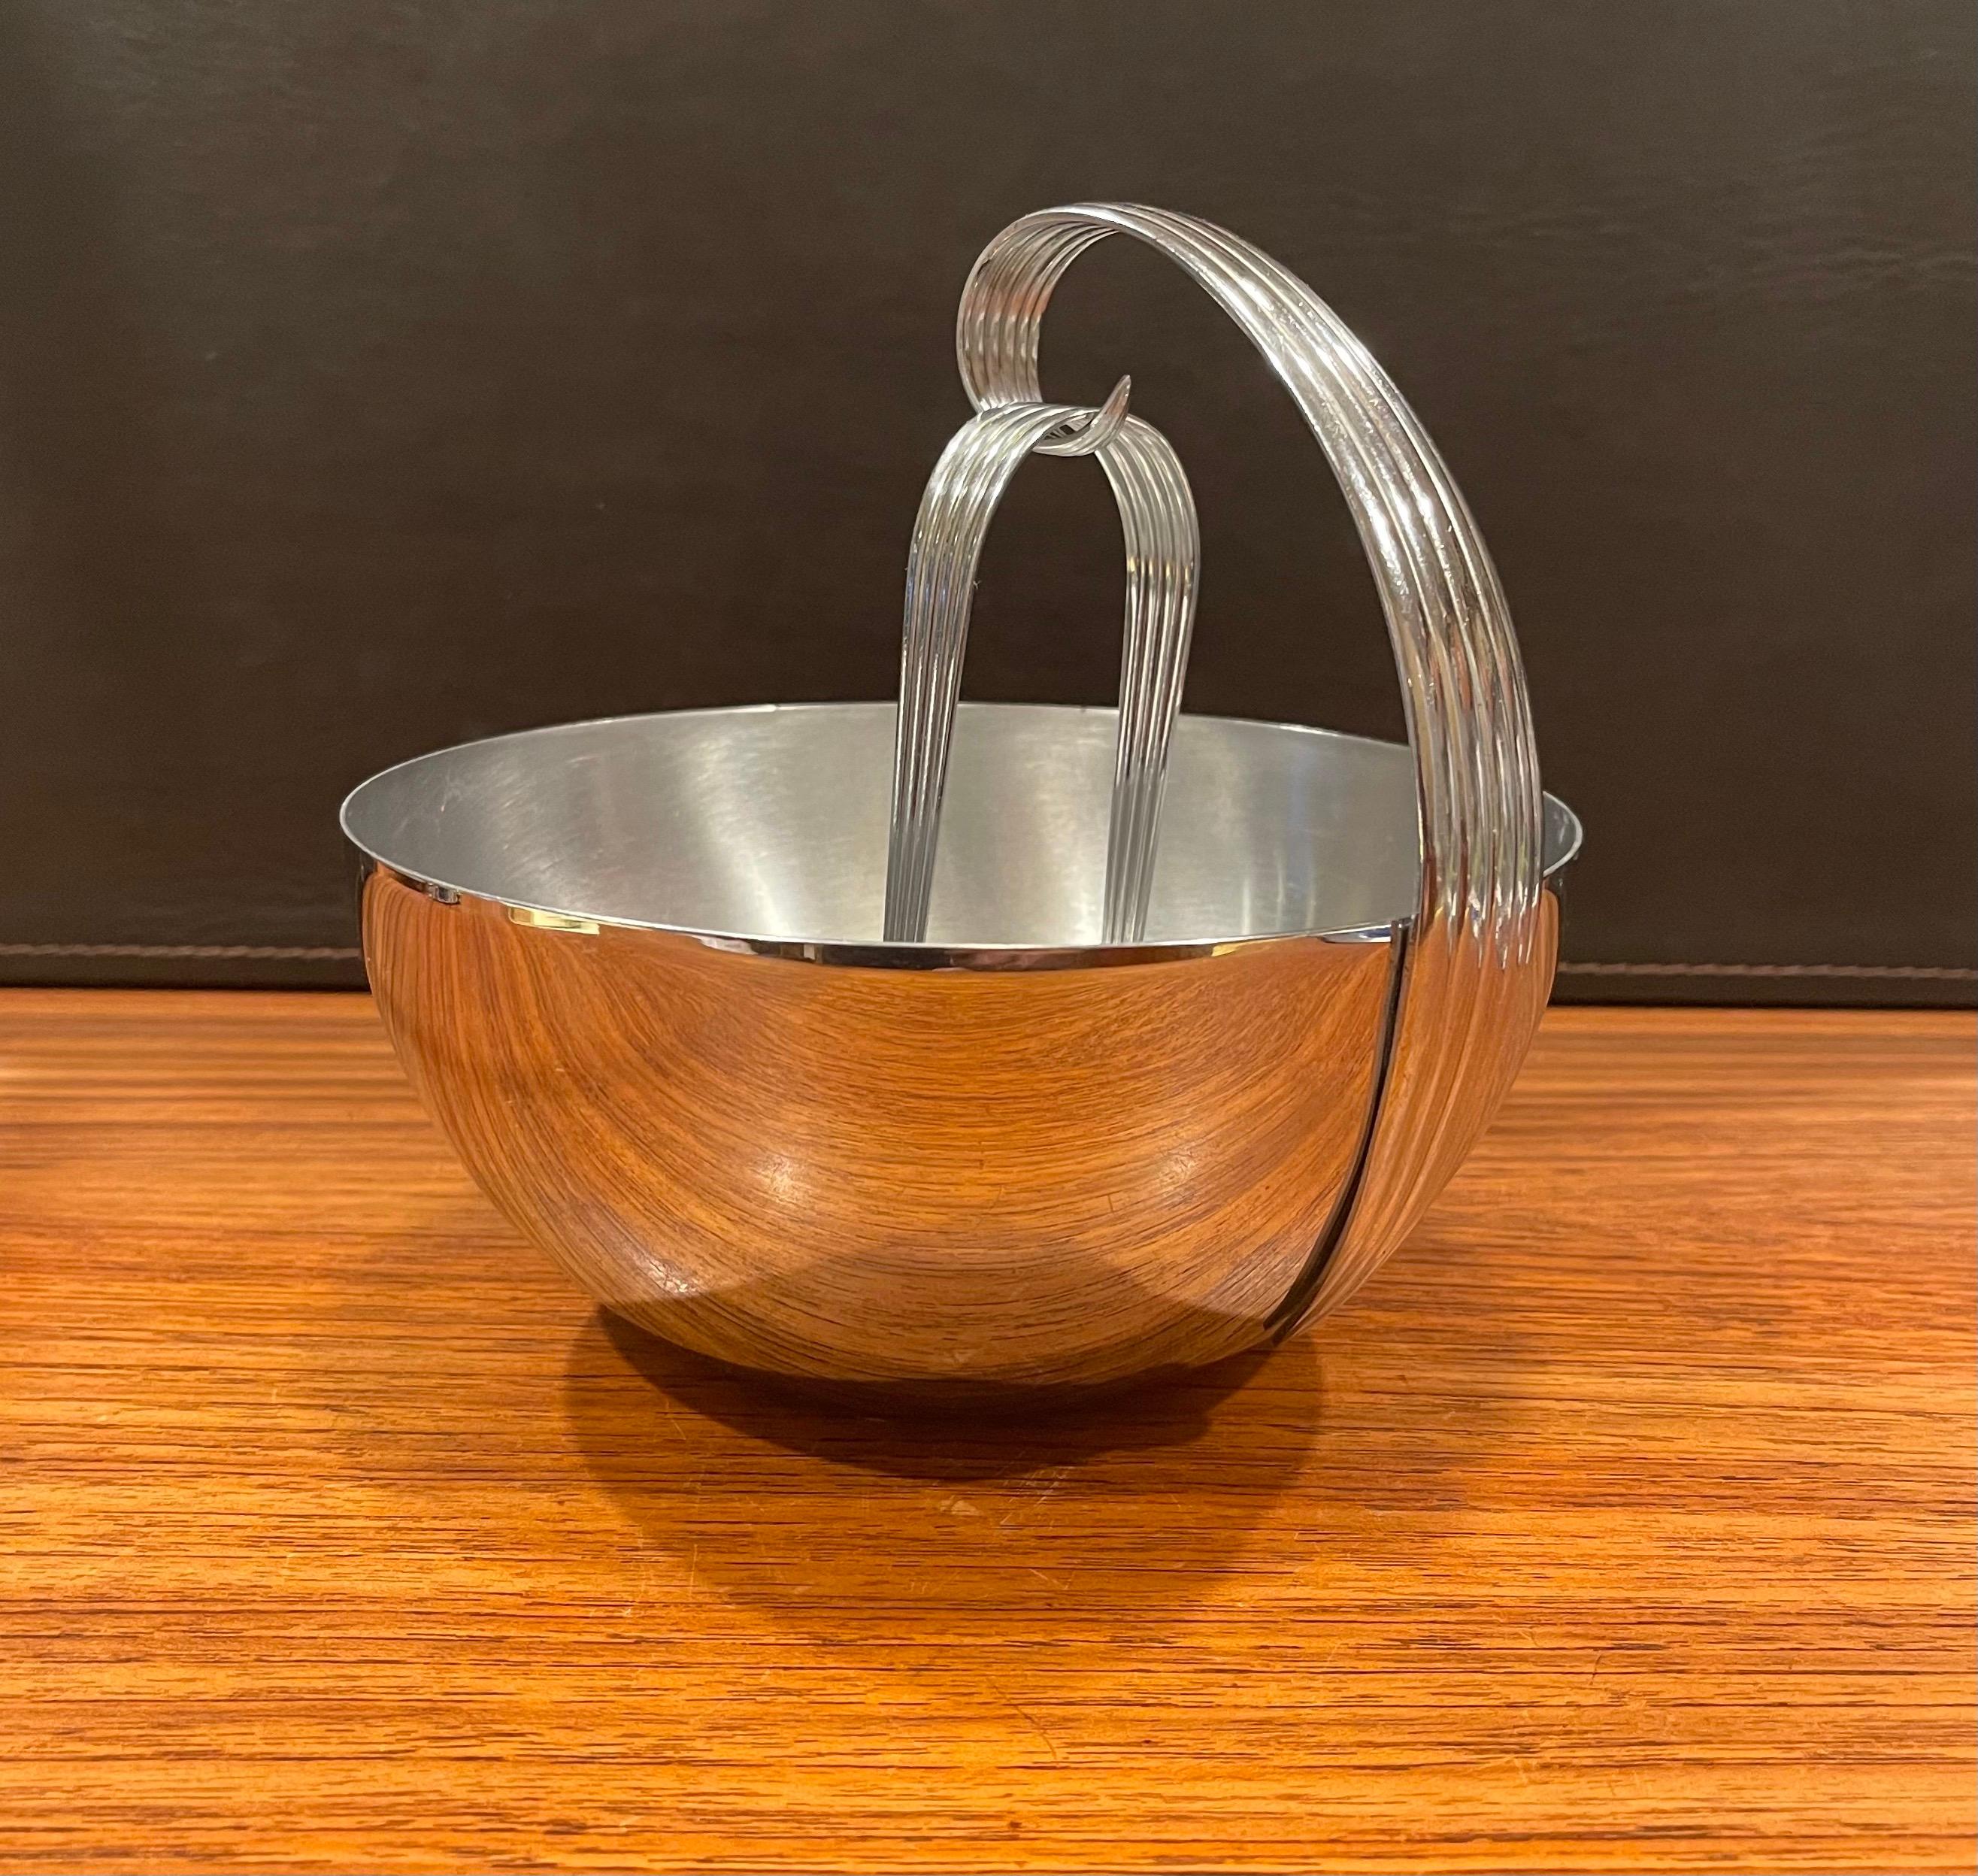 A very nice Art Deco chrome ice bucket with tongs by Russel Wright for Chase & Co., circa 1930s. The design features a ribbed and curved handle on a small stainless steel bucket or bowl. The set is in very good condition and measures 7